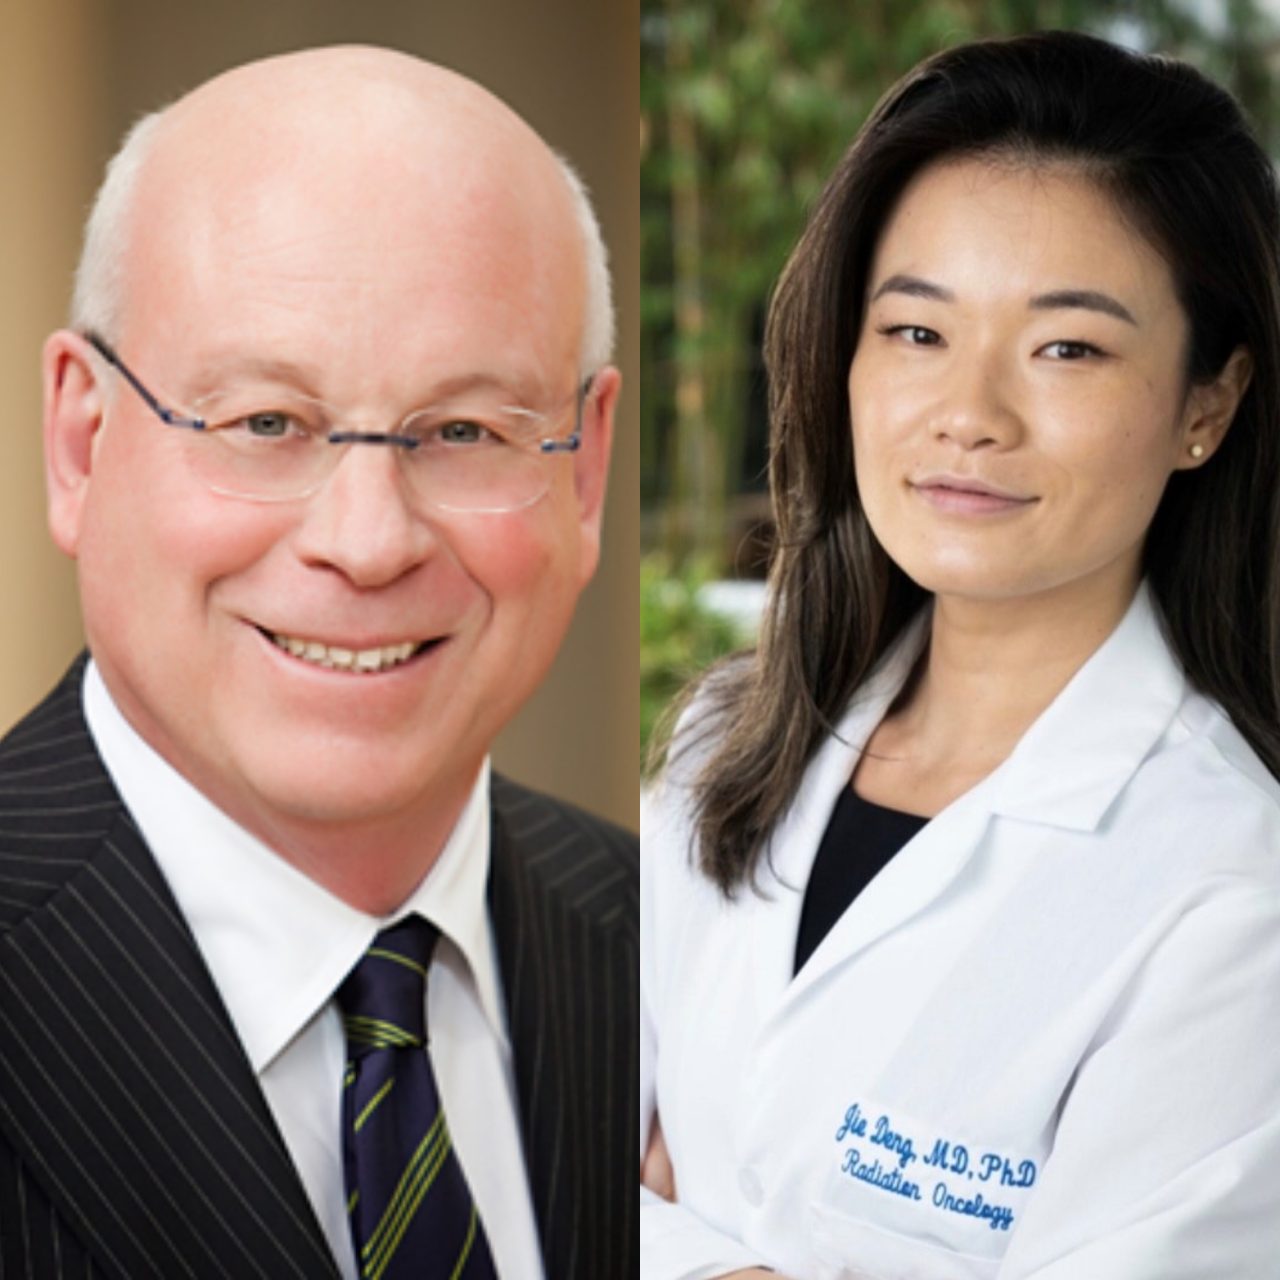 Michael Steinberg: Pleased to announce that Dr. Jie Deng, MD, PhD, a physician-scientist, has joined the faculty of UCLA Radiation Oncology as an Assistant Professor.